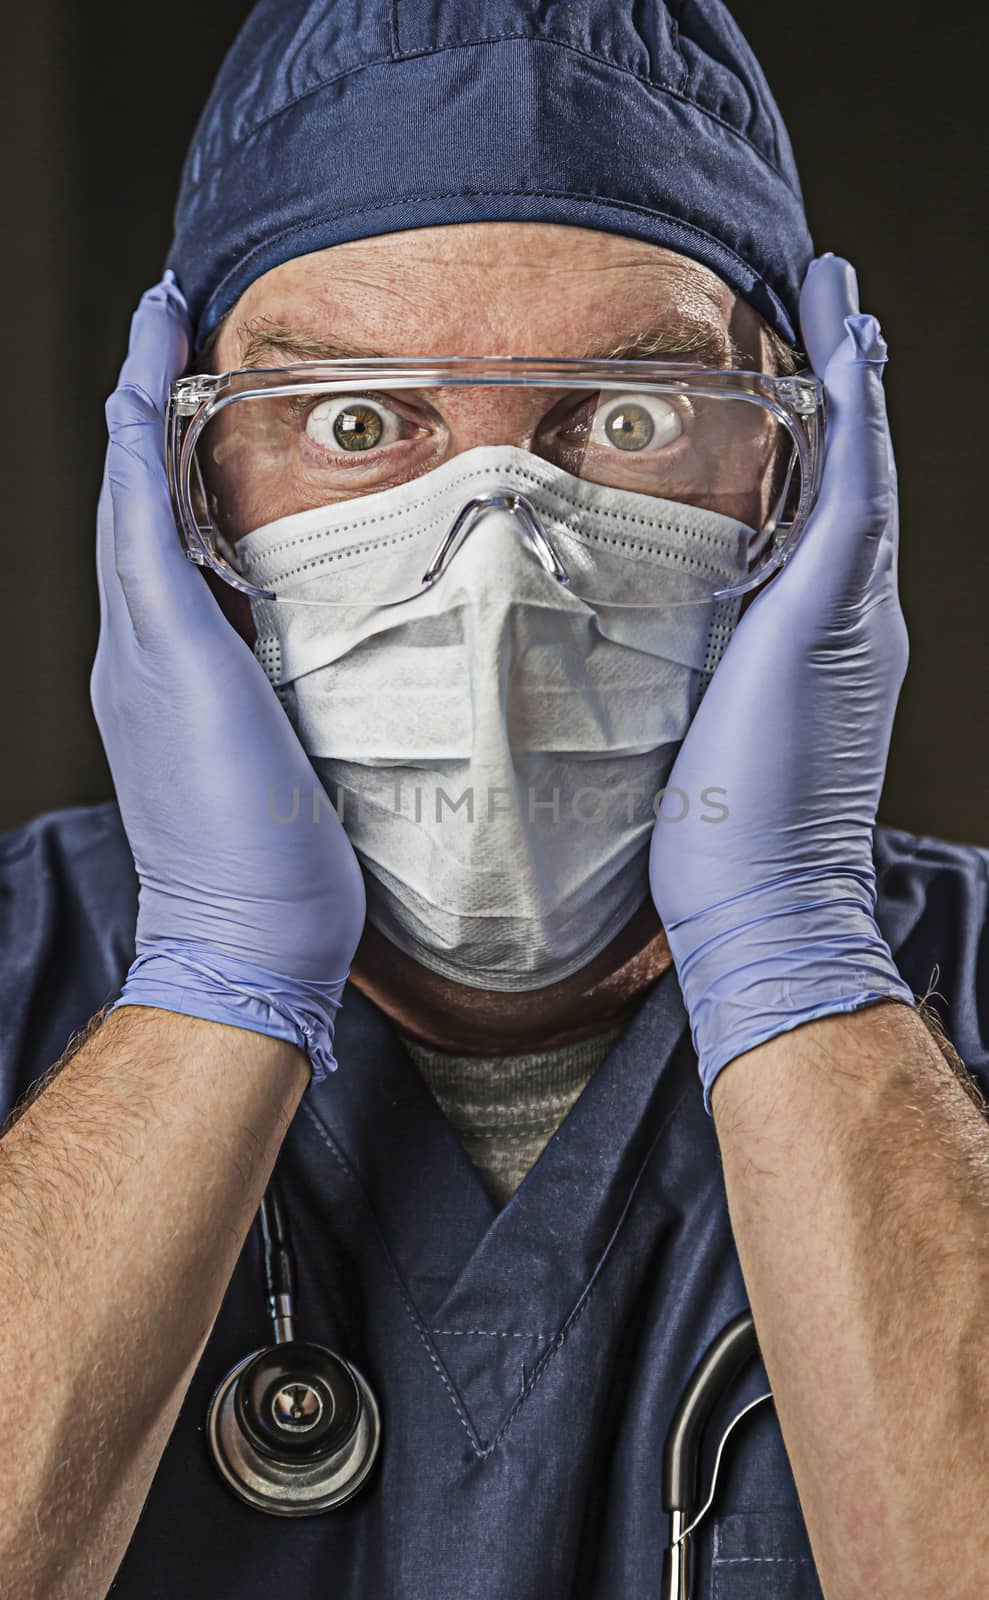 Stunned Male Doctor or Nurse with Protective Wear and Stethoscope.